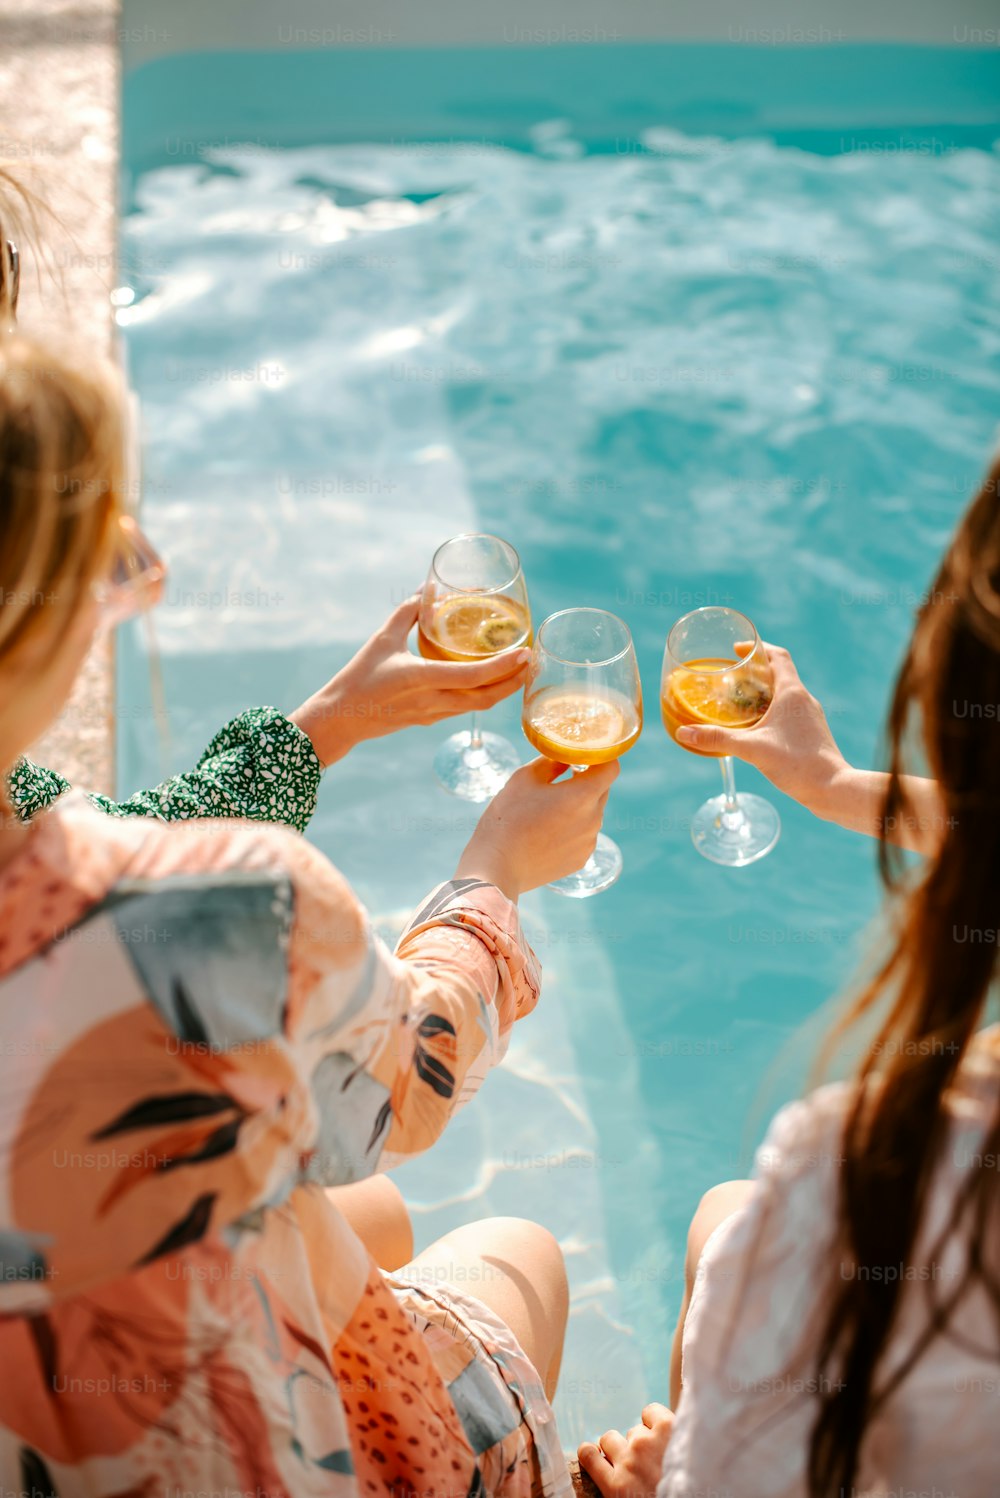 a group of women sitting next to a swimming pool holding wine glasses